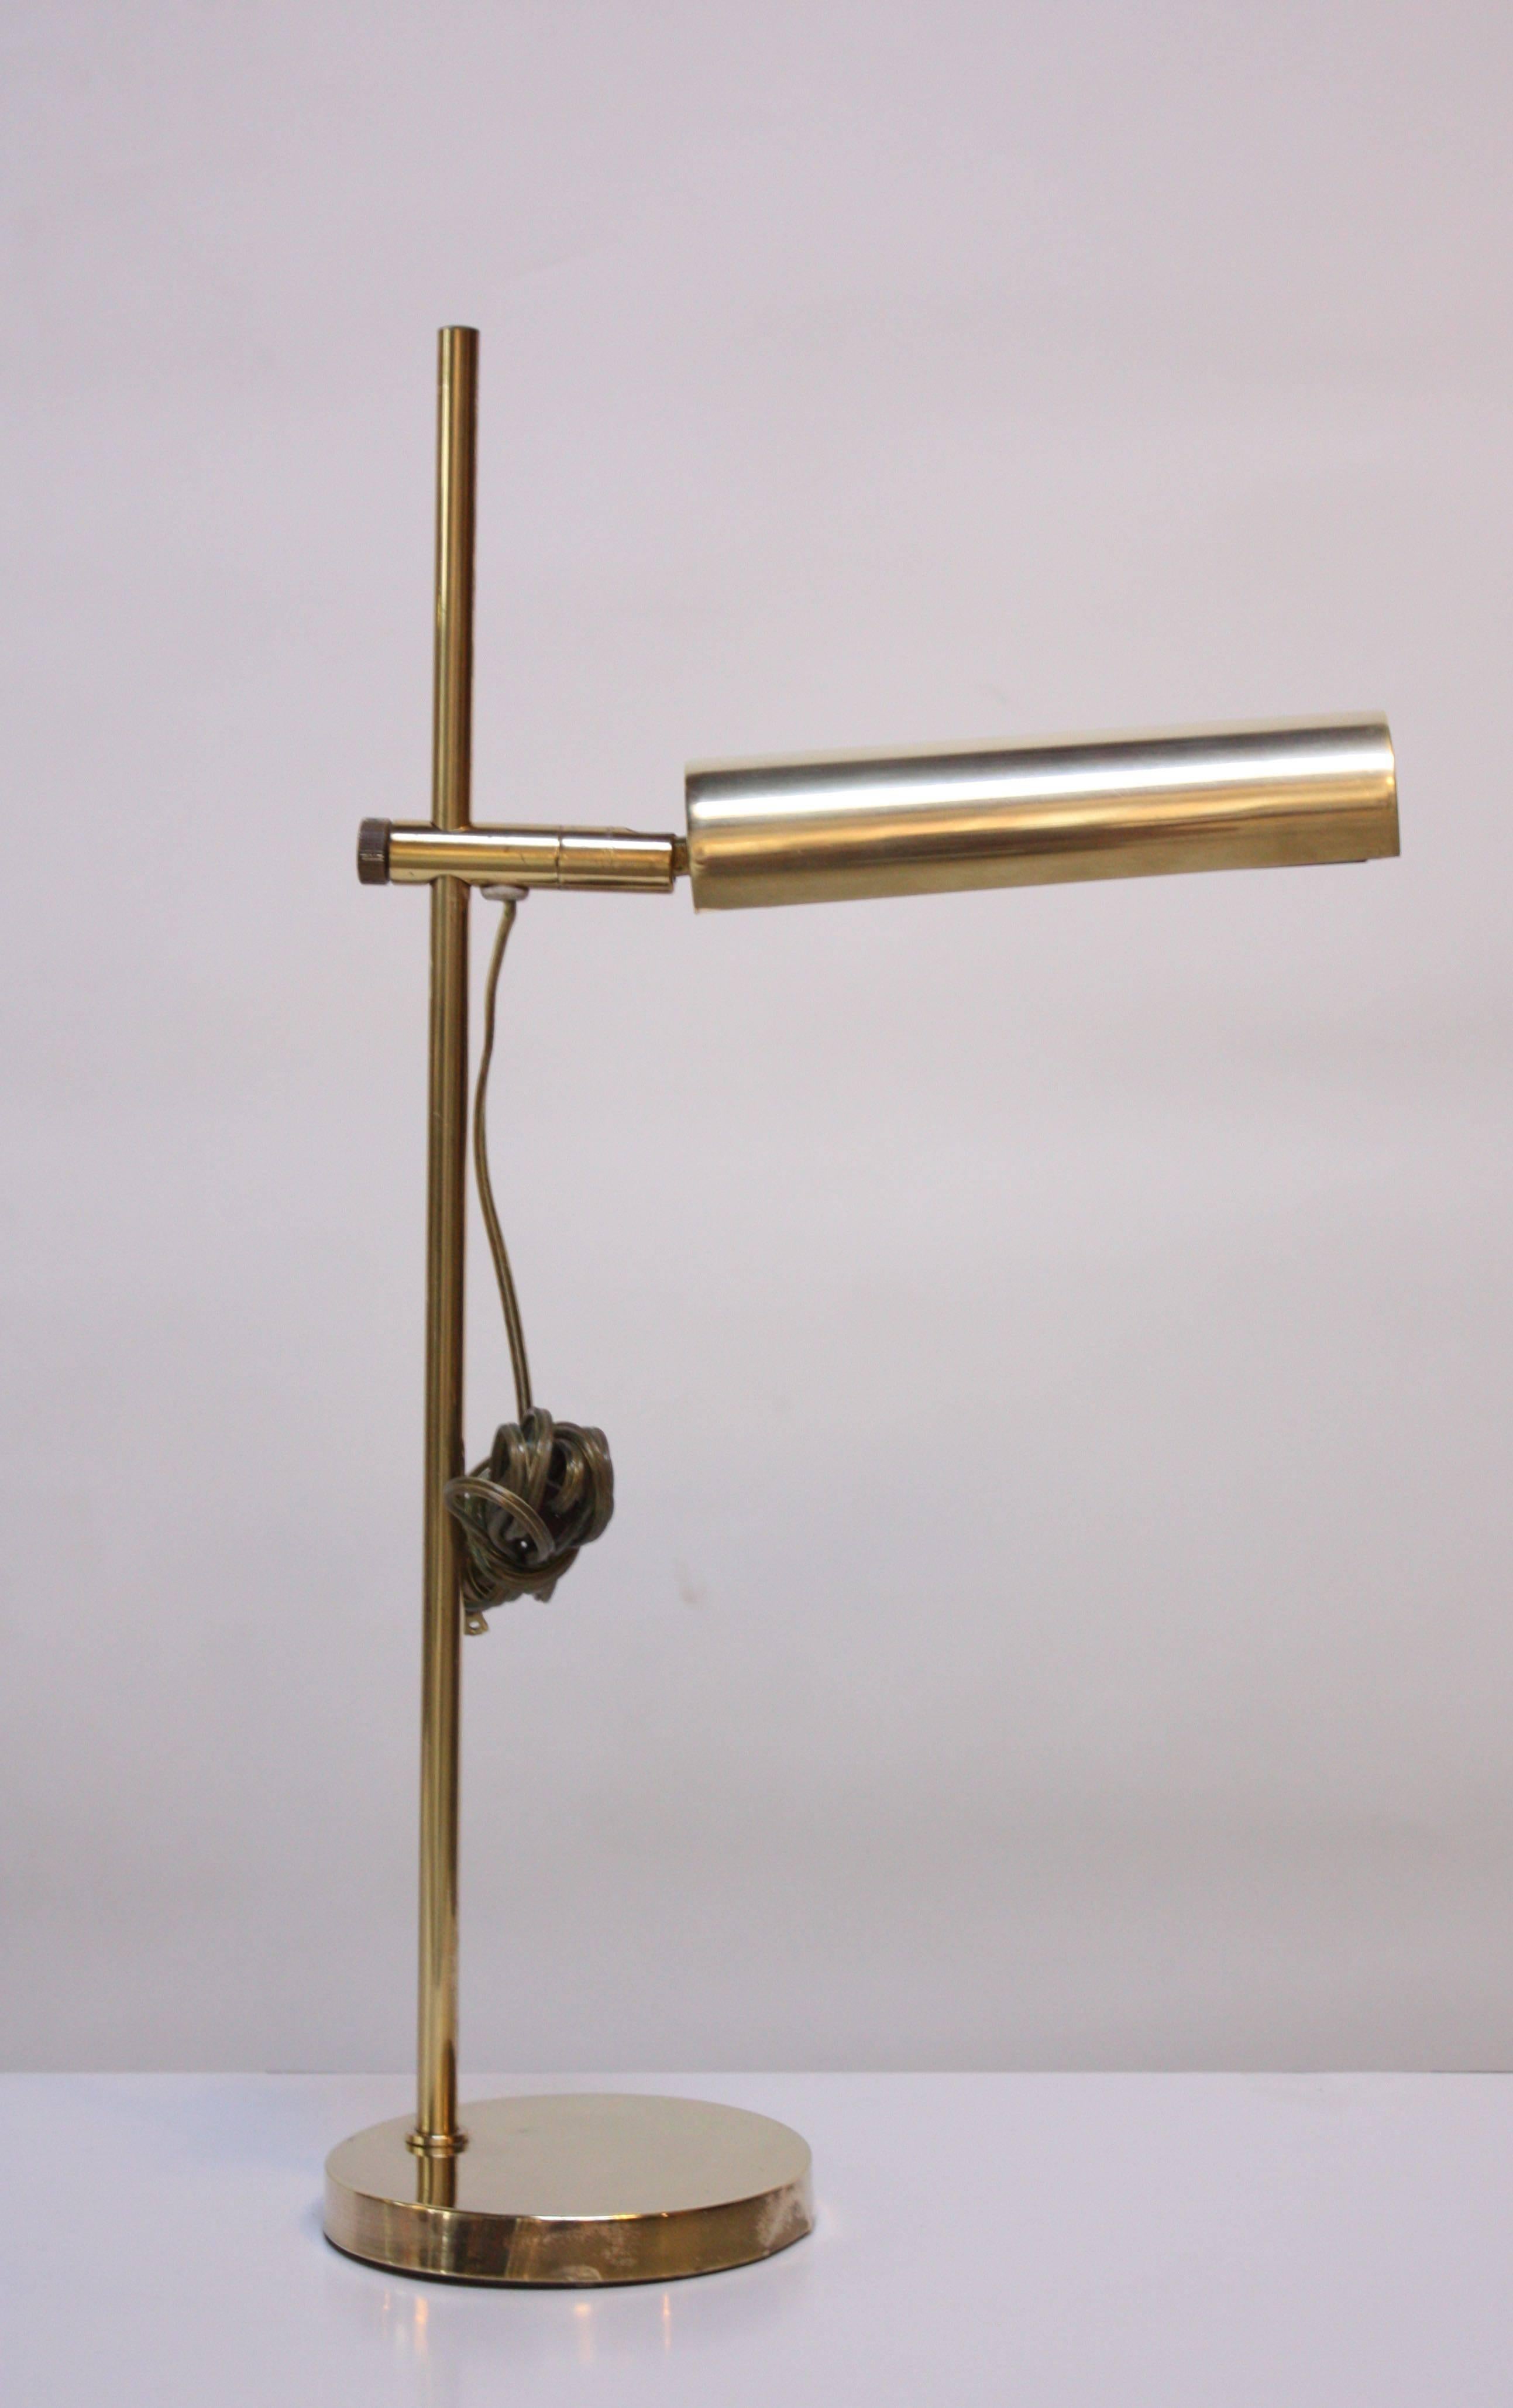 This striking brass table lamp from Koch & Lowy features an adjustable shade offering 360 degree mobility and tilt function. Additionally the shade height is adjustable along the stem. Rewired and ready for use. 
Manufacturer's Mark present.